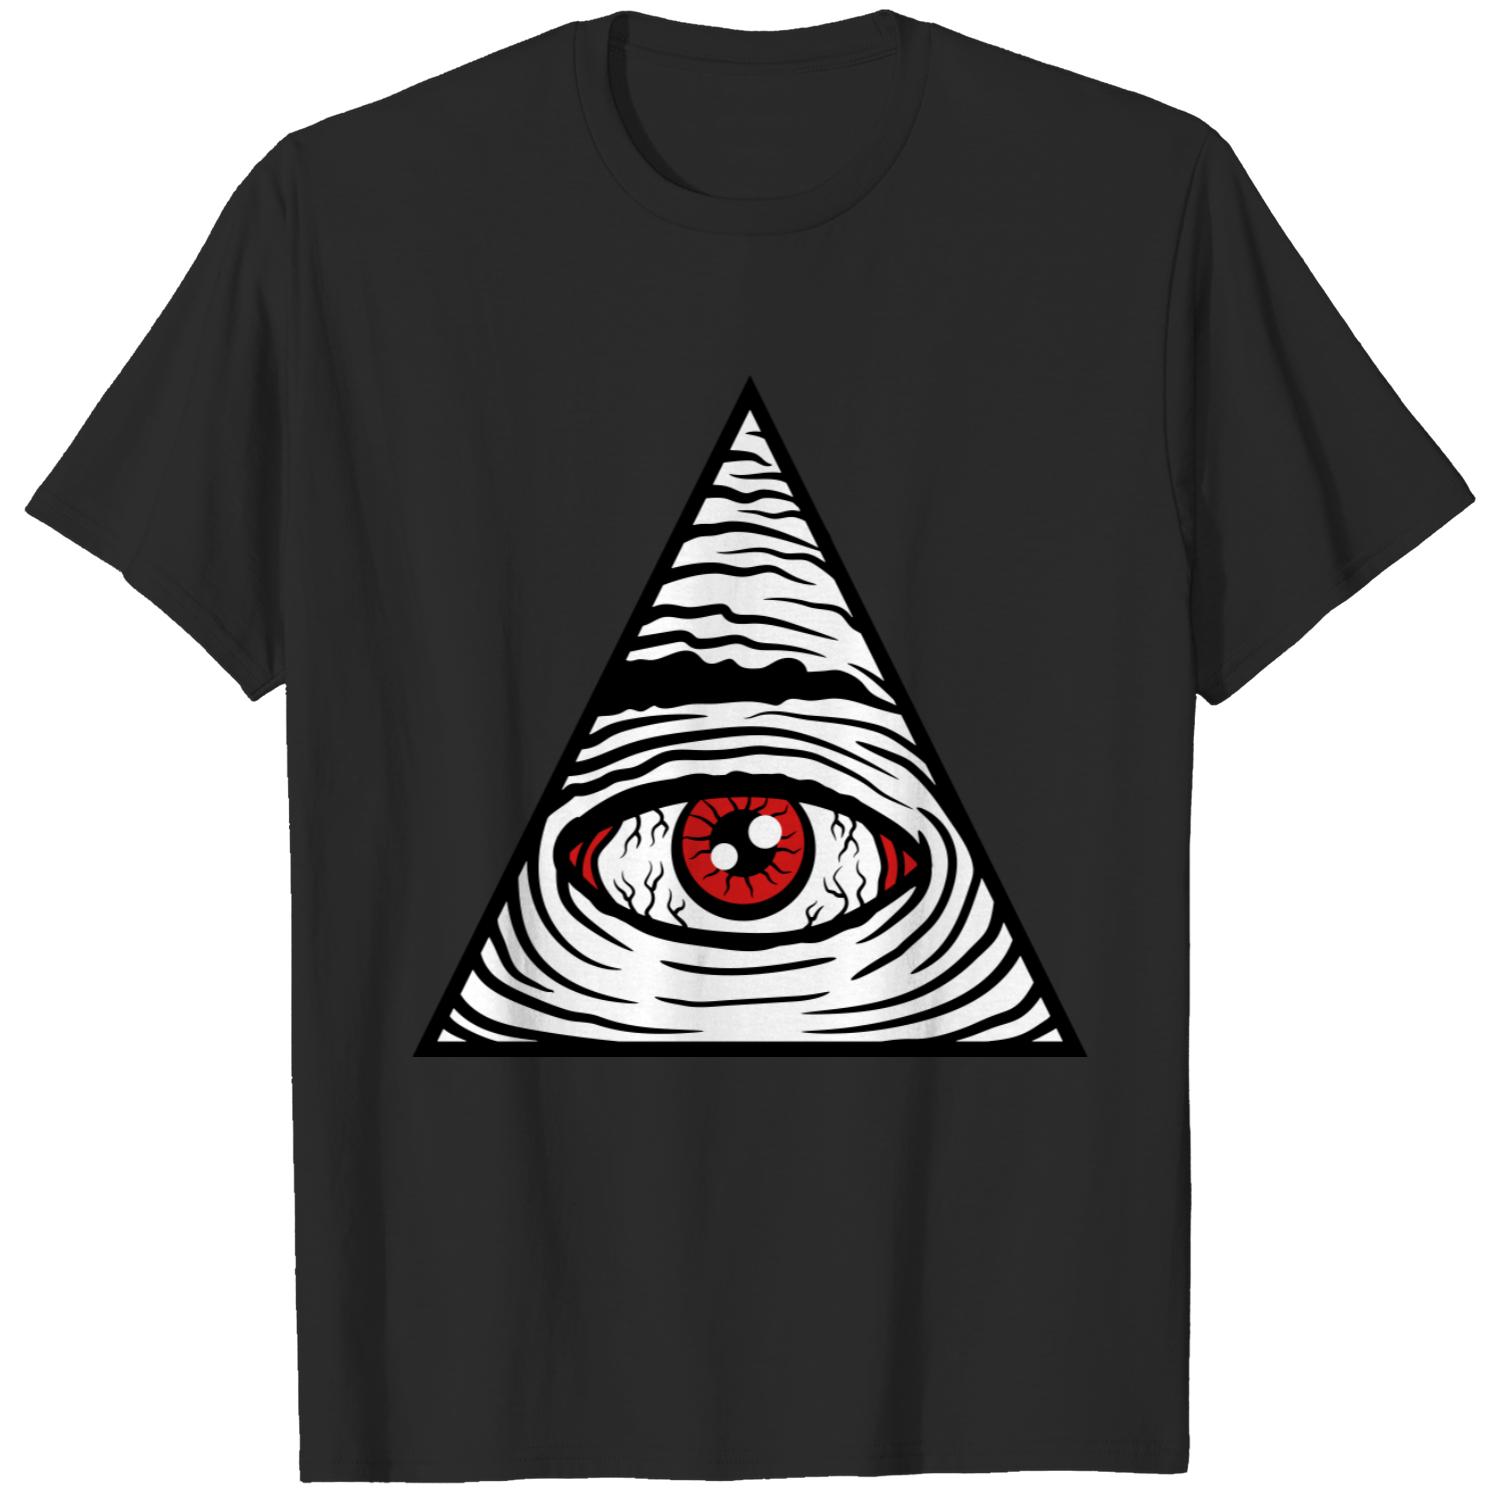 The all-seeing T-shirt